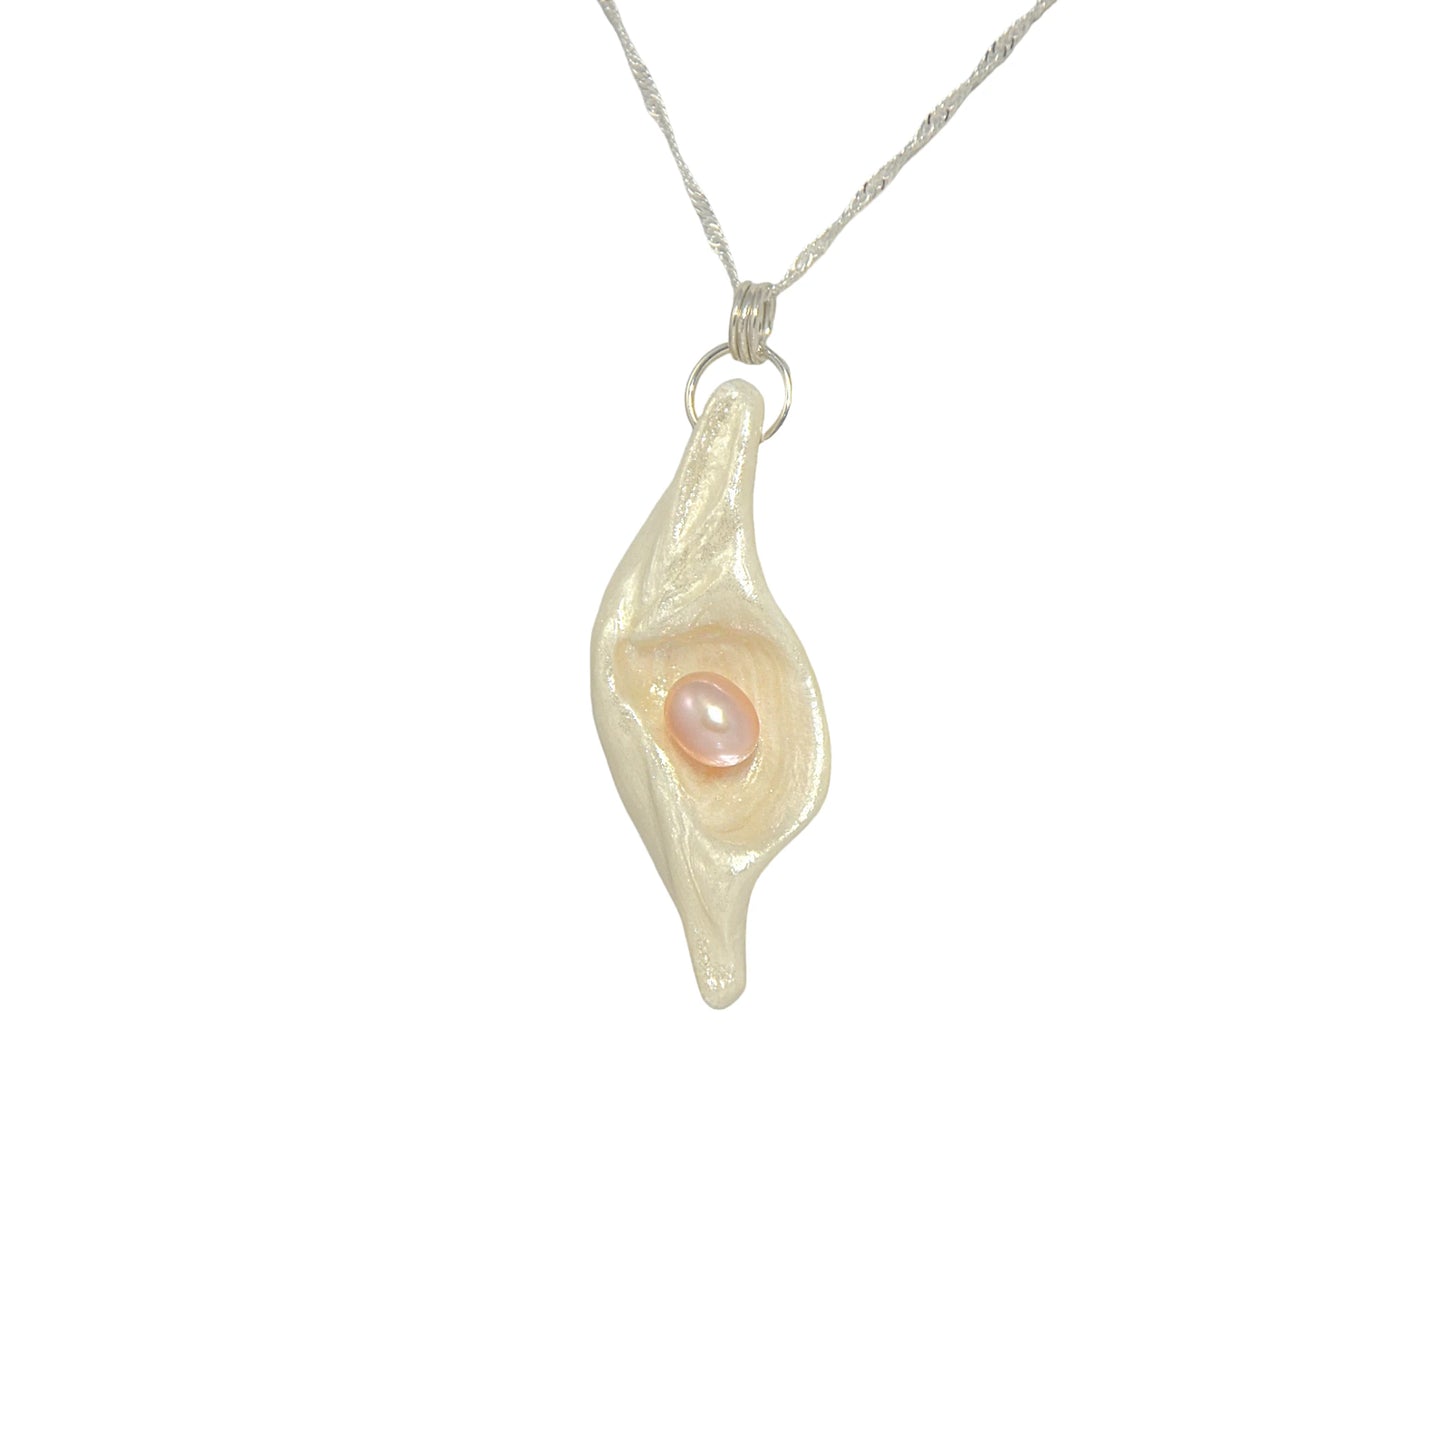 Glow natural seashell pendant with a pink freshwater pearl. 